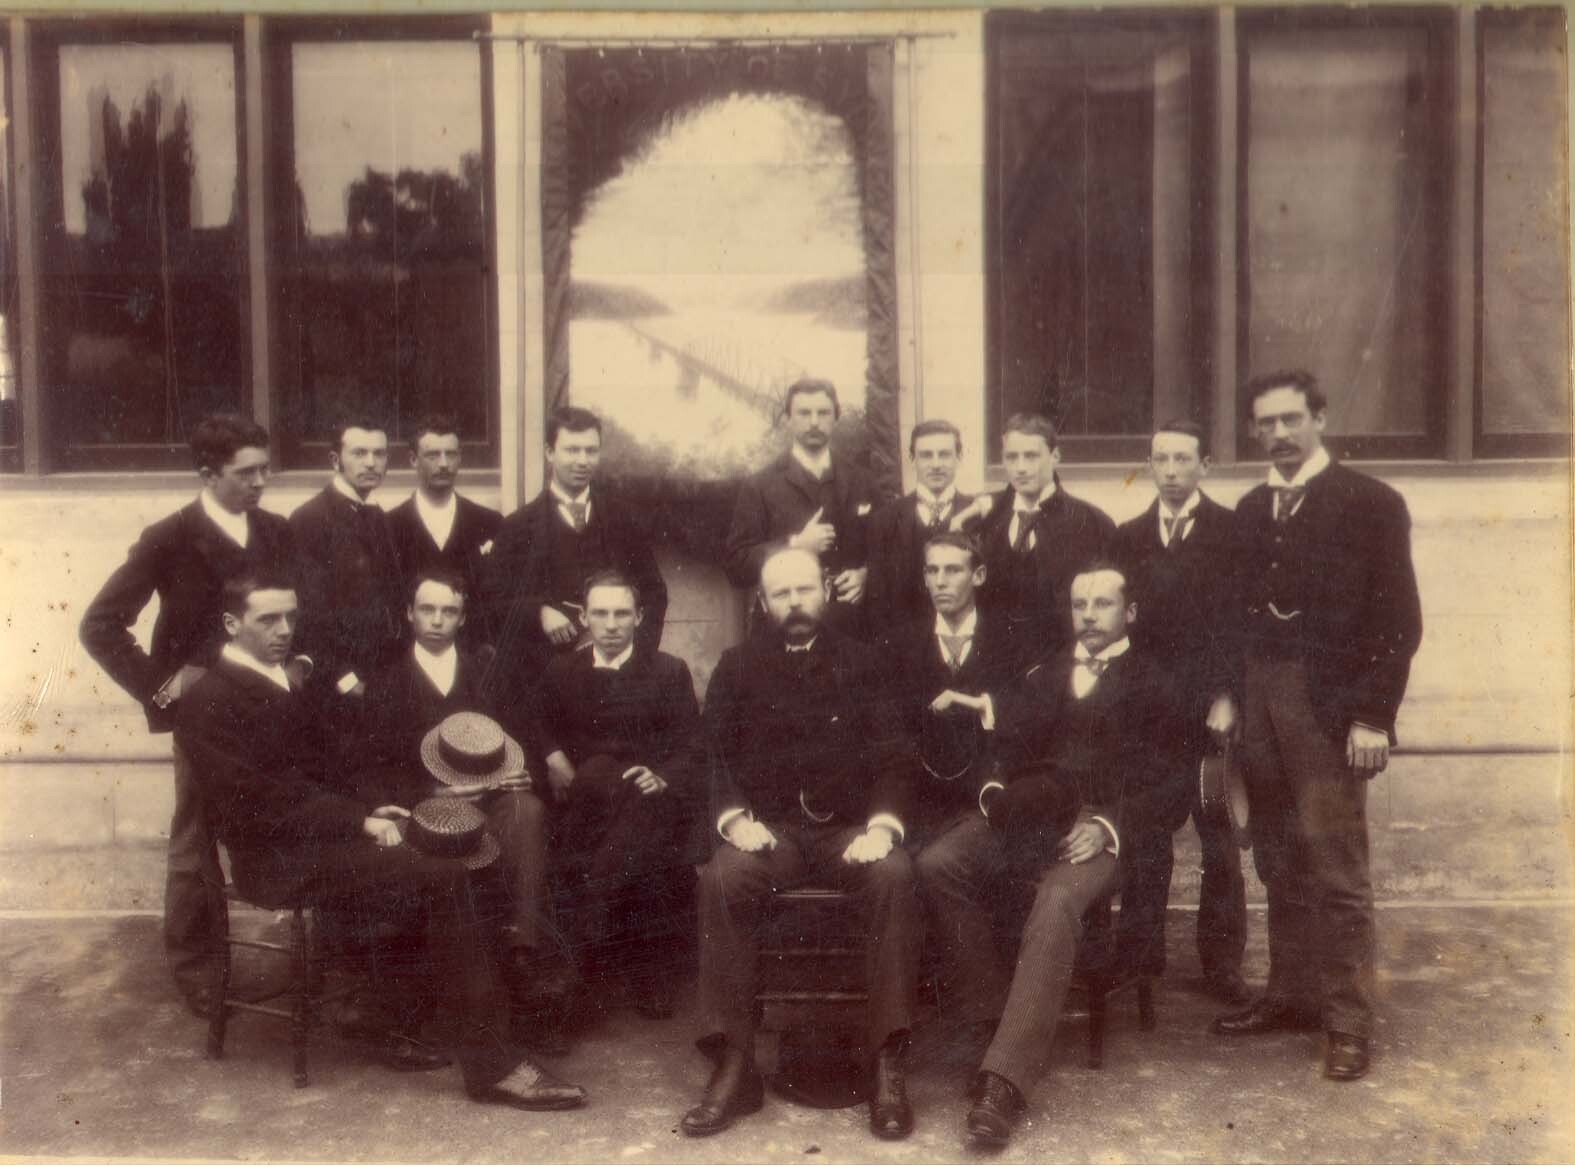 PROF. W. H. WARREN AND FIRST YEAR ENGINEERING STUDENTS